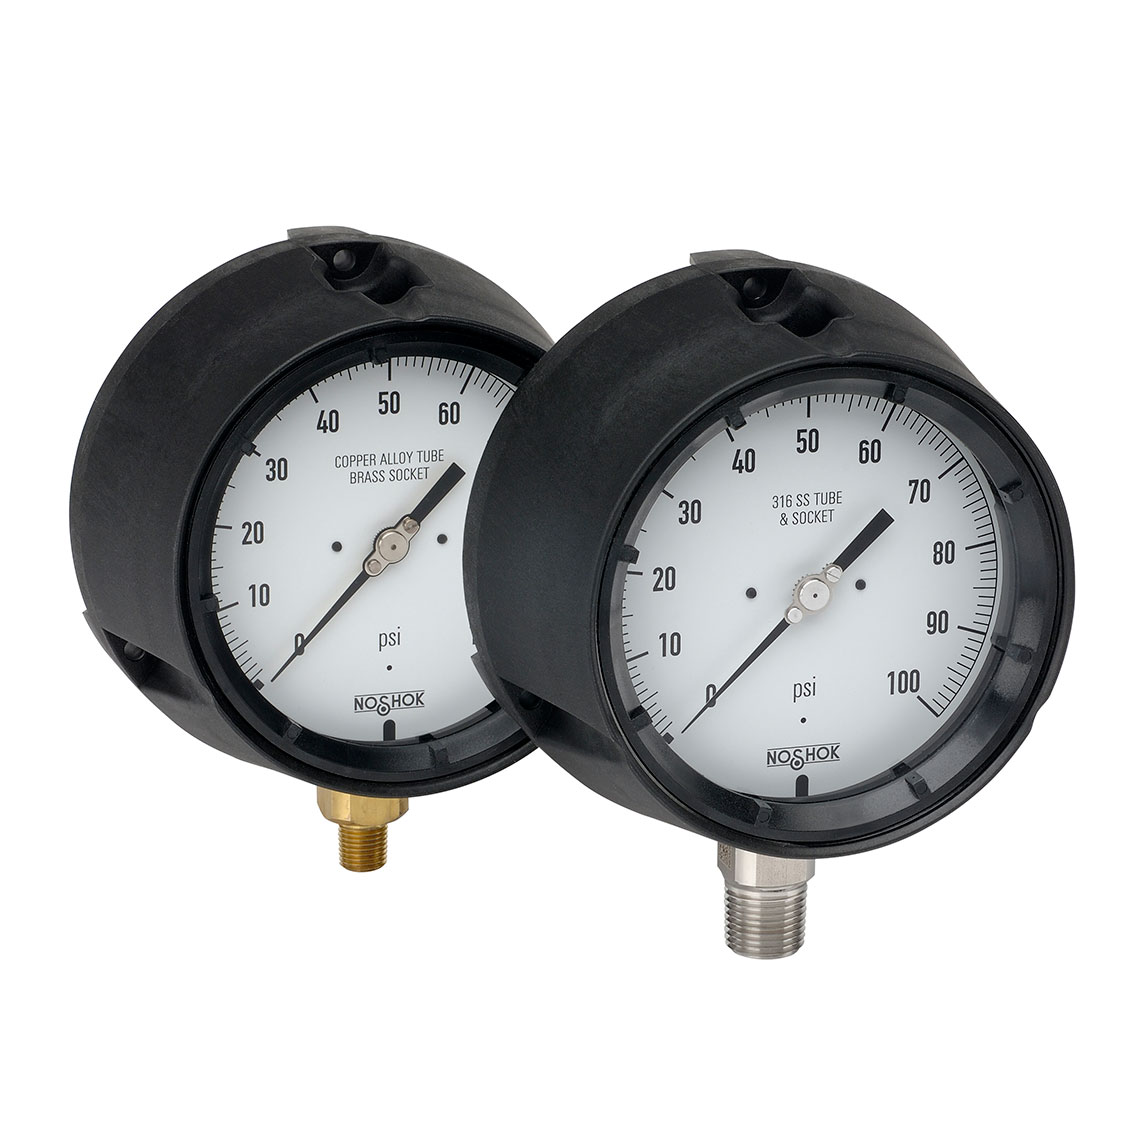 45-740-2000-psi-1/4 600/700 Series Process Dry and Liquid Filled Pressure Gauges